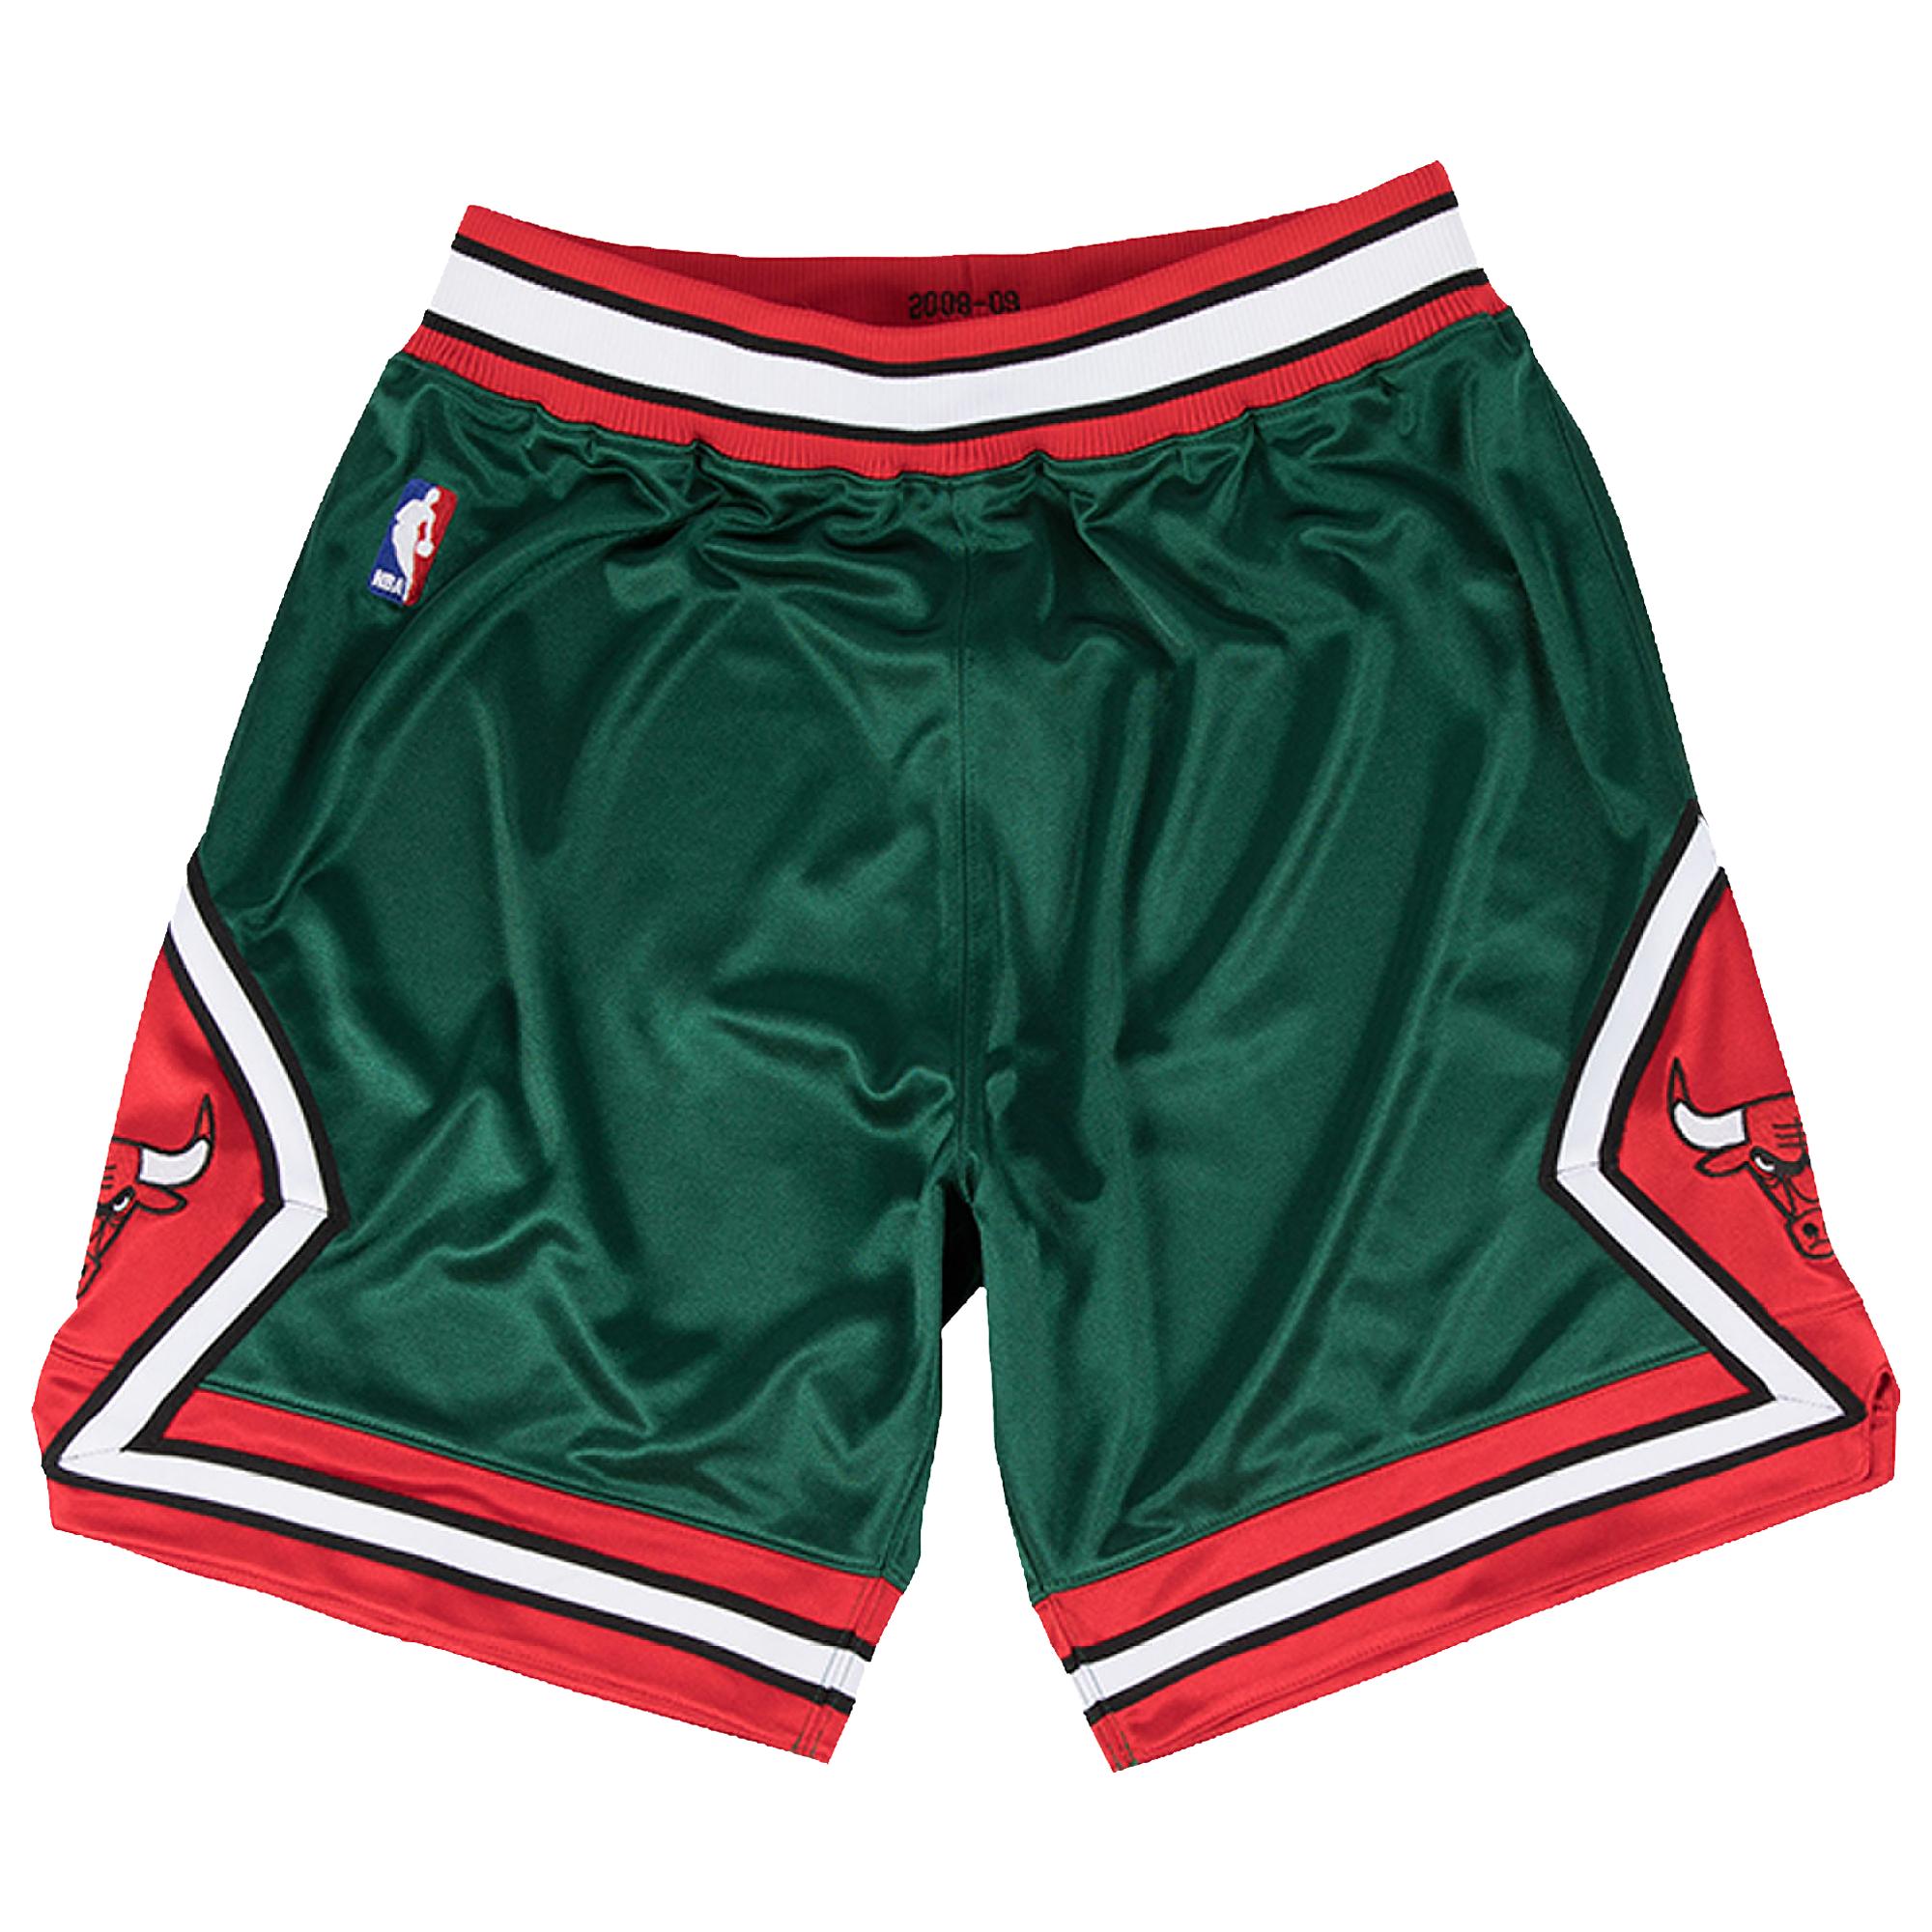 Nba Shorts / Simply browse an extensive selection of the best.